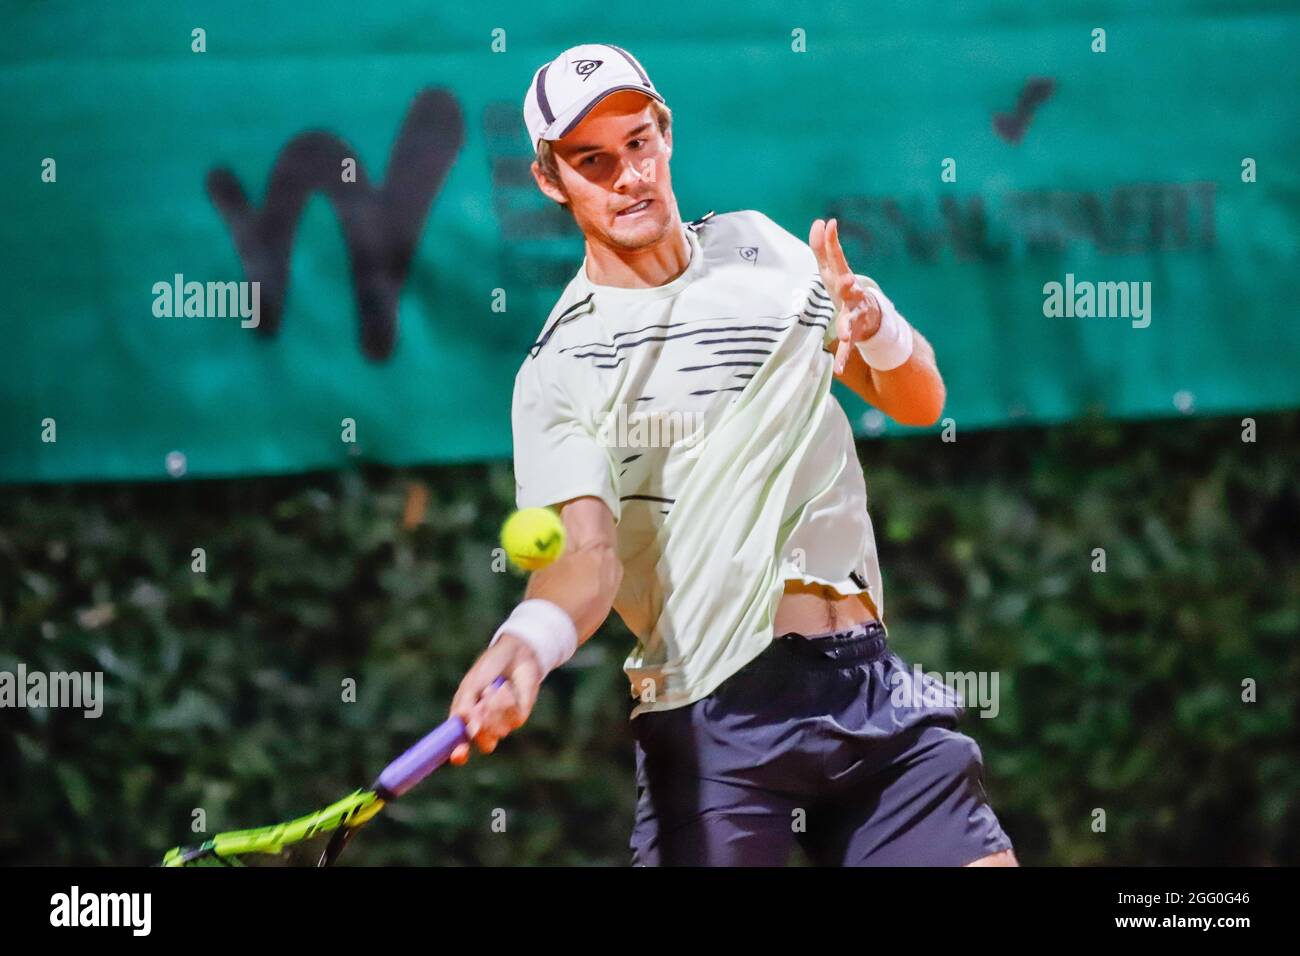 Itf tennis hi-res stock photography and images - Alamy